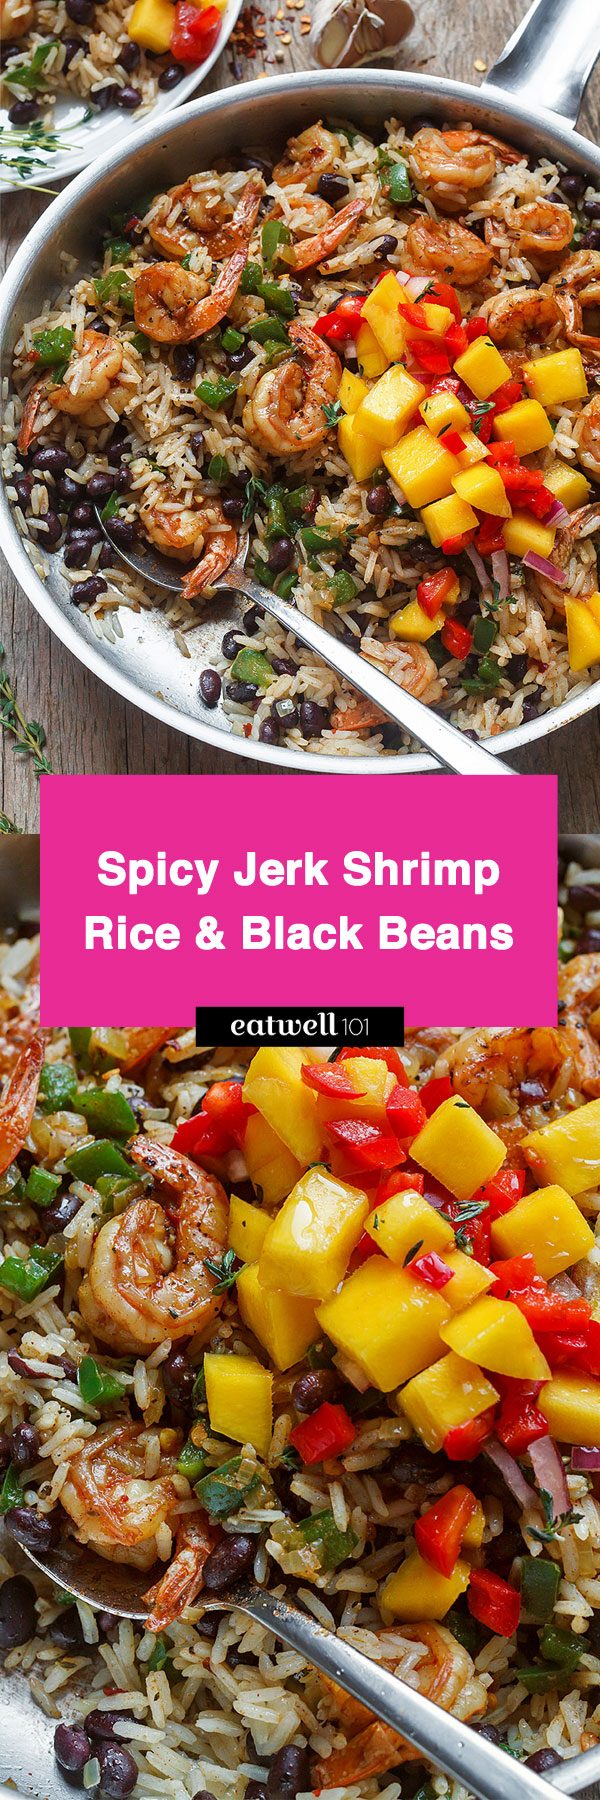 Spicy Jerk Shrimp with Rice and Black Bean – This easy shrimp jerk is super healthy and delicious.